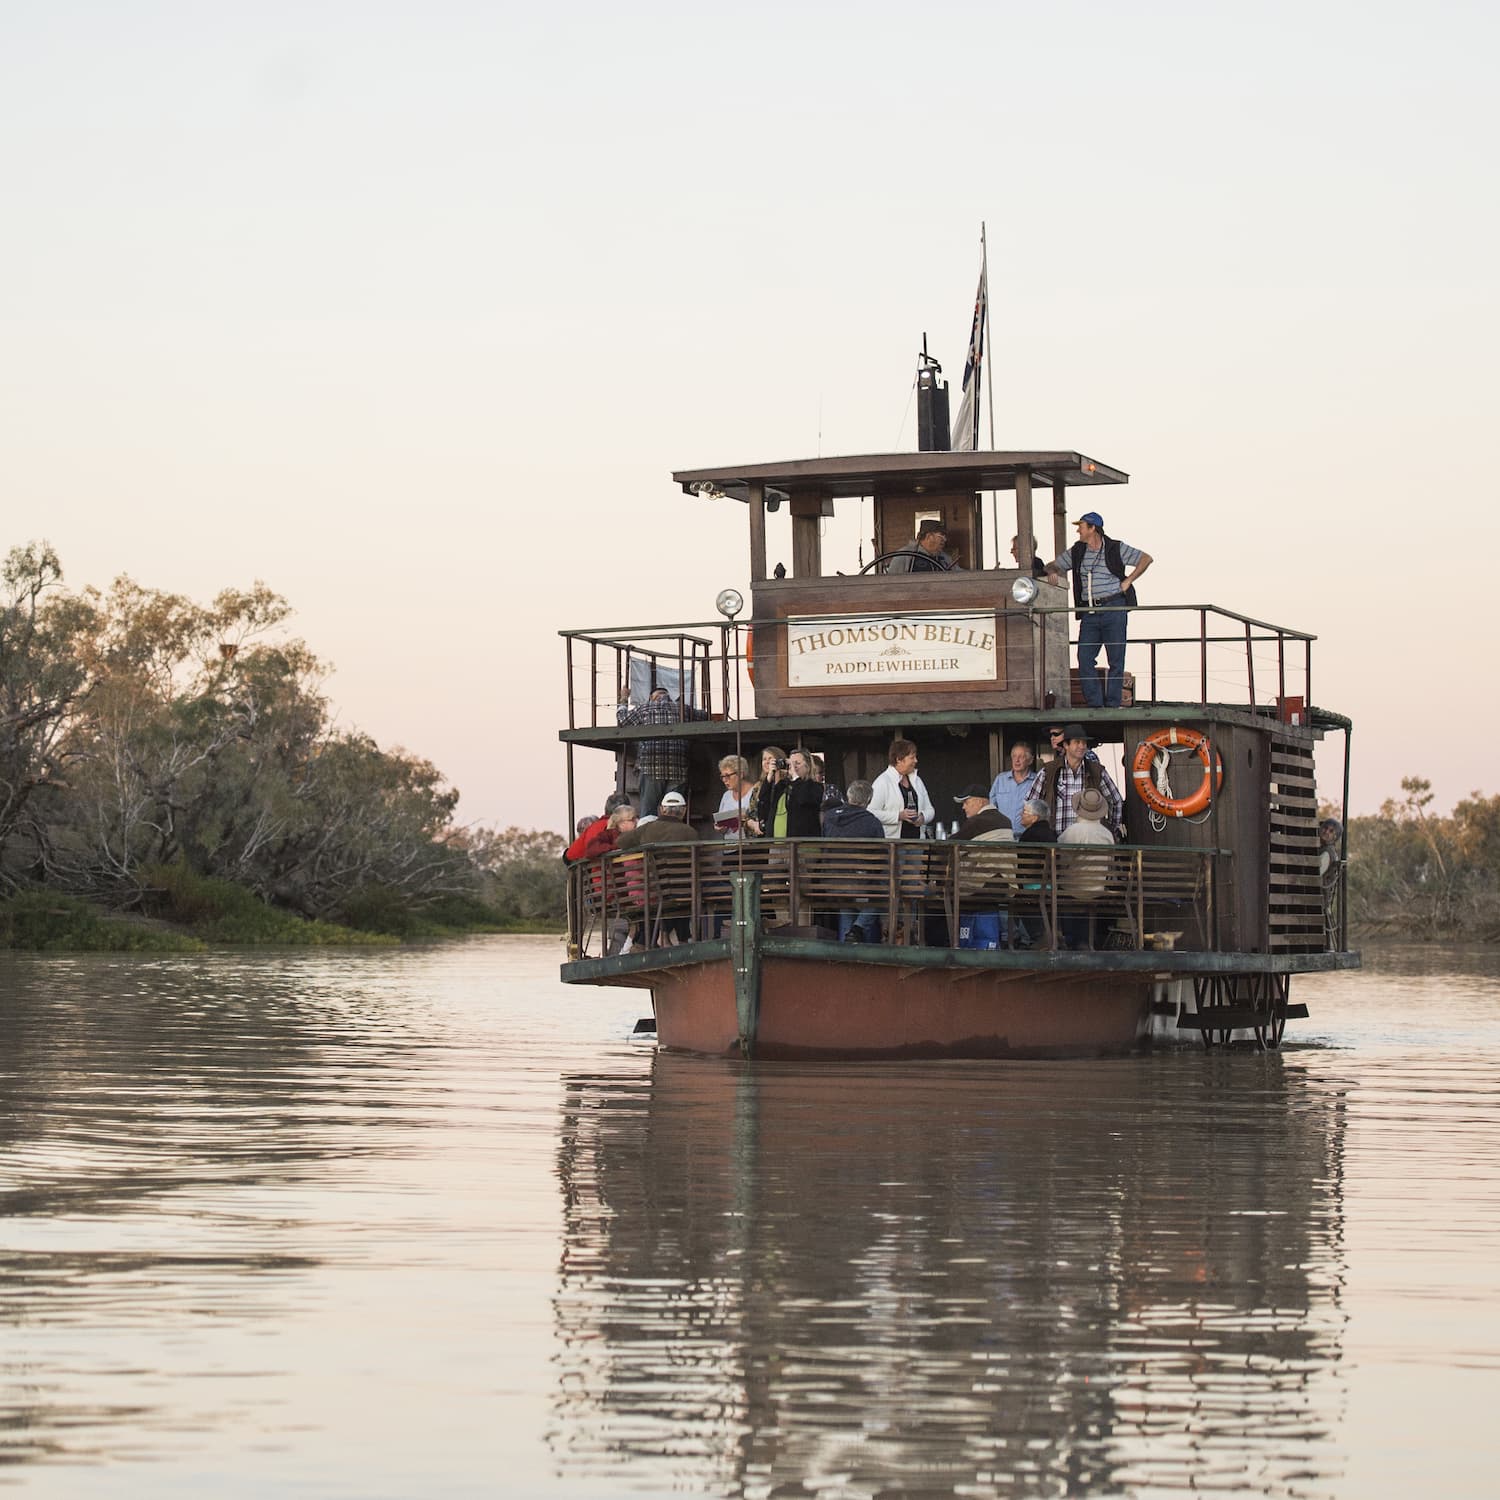 The Thomson Belle cruising the Thomson River at sunset